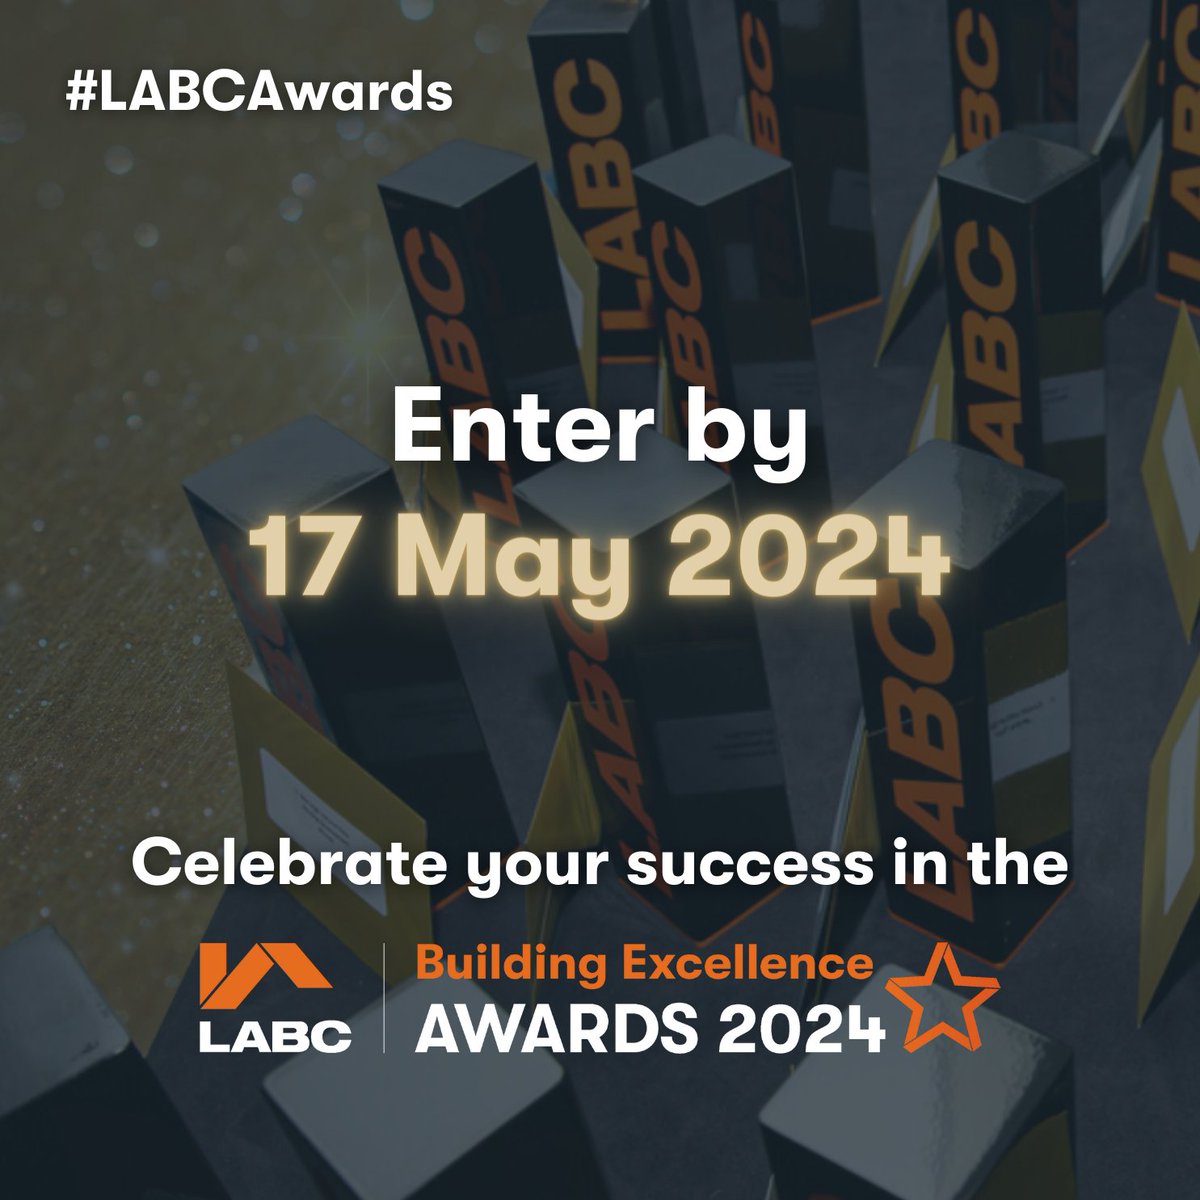 We’re excited to see the amazing projects and impressive individuals working within our industry! Get your nominations in for #LABCAwards by Friday 17 May ow.ly/jANV50R4xHZ #construction #labcawards